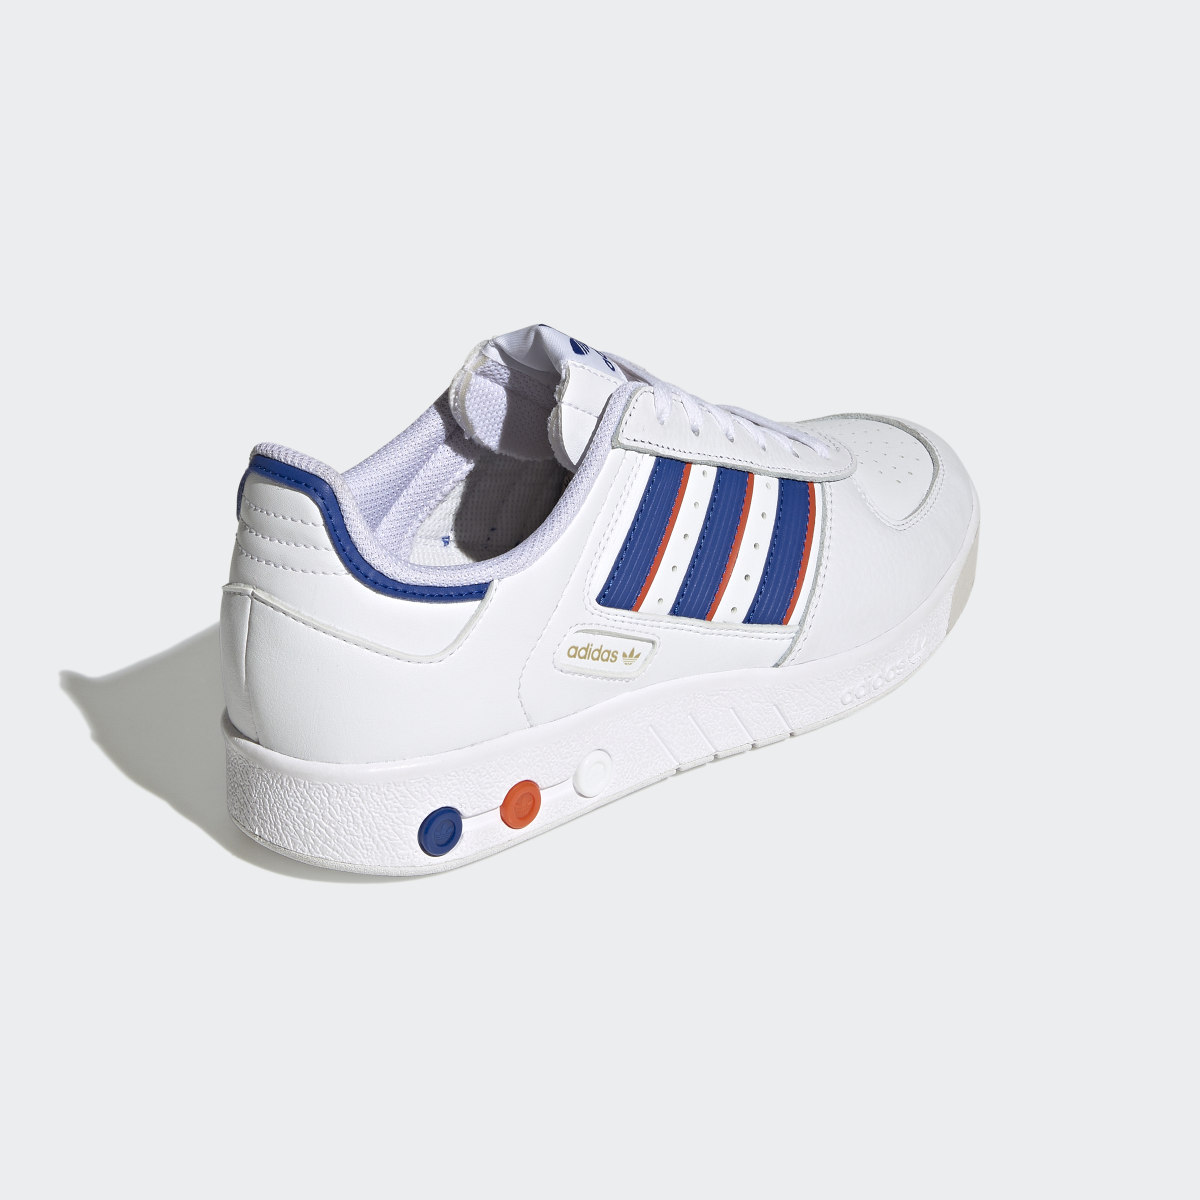 Adidas G.S. Court Shoes. 6